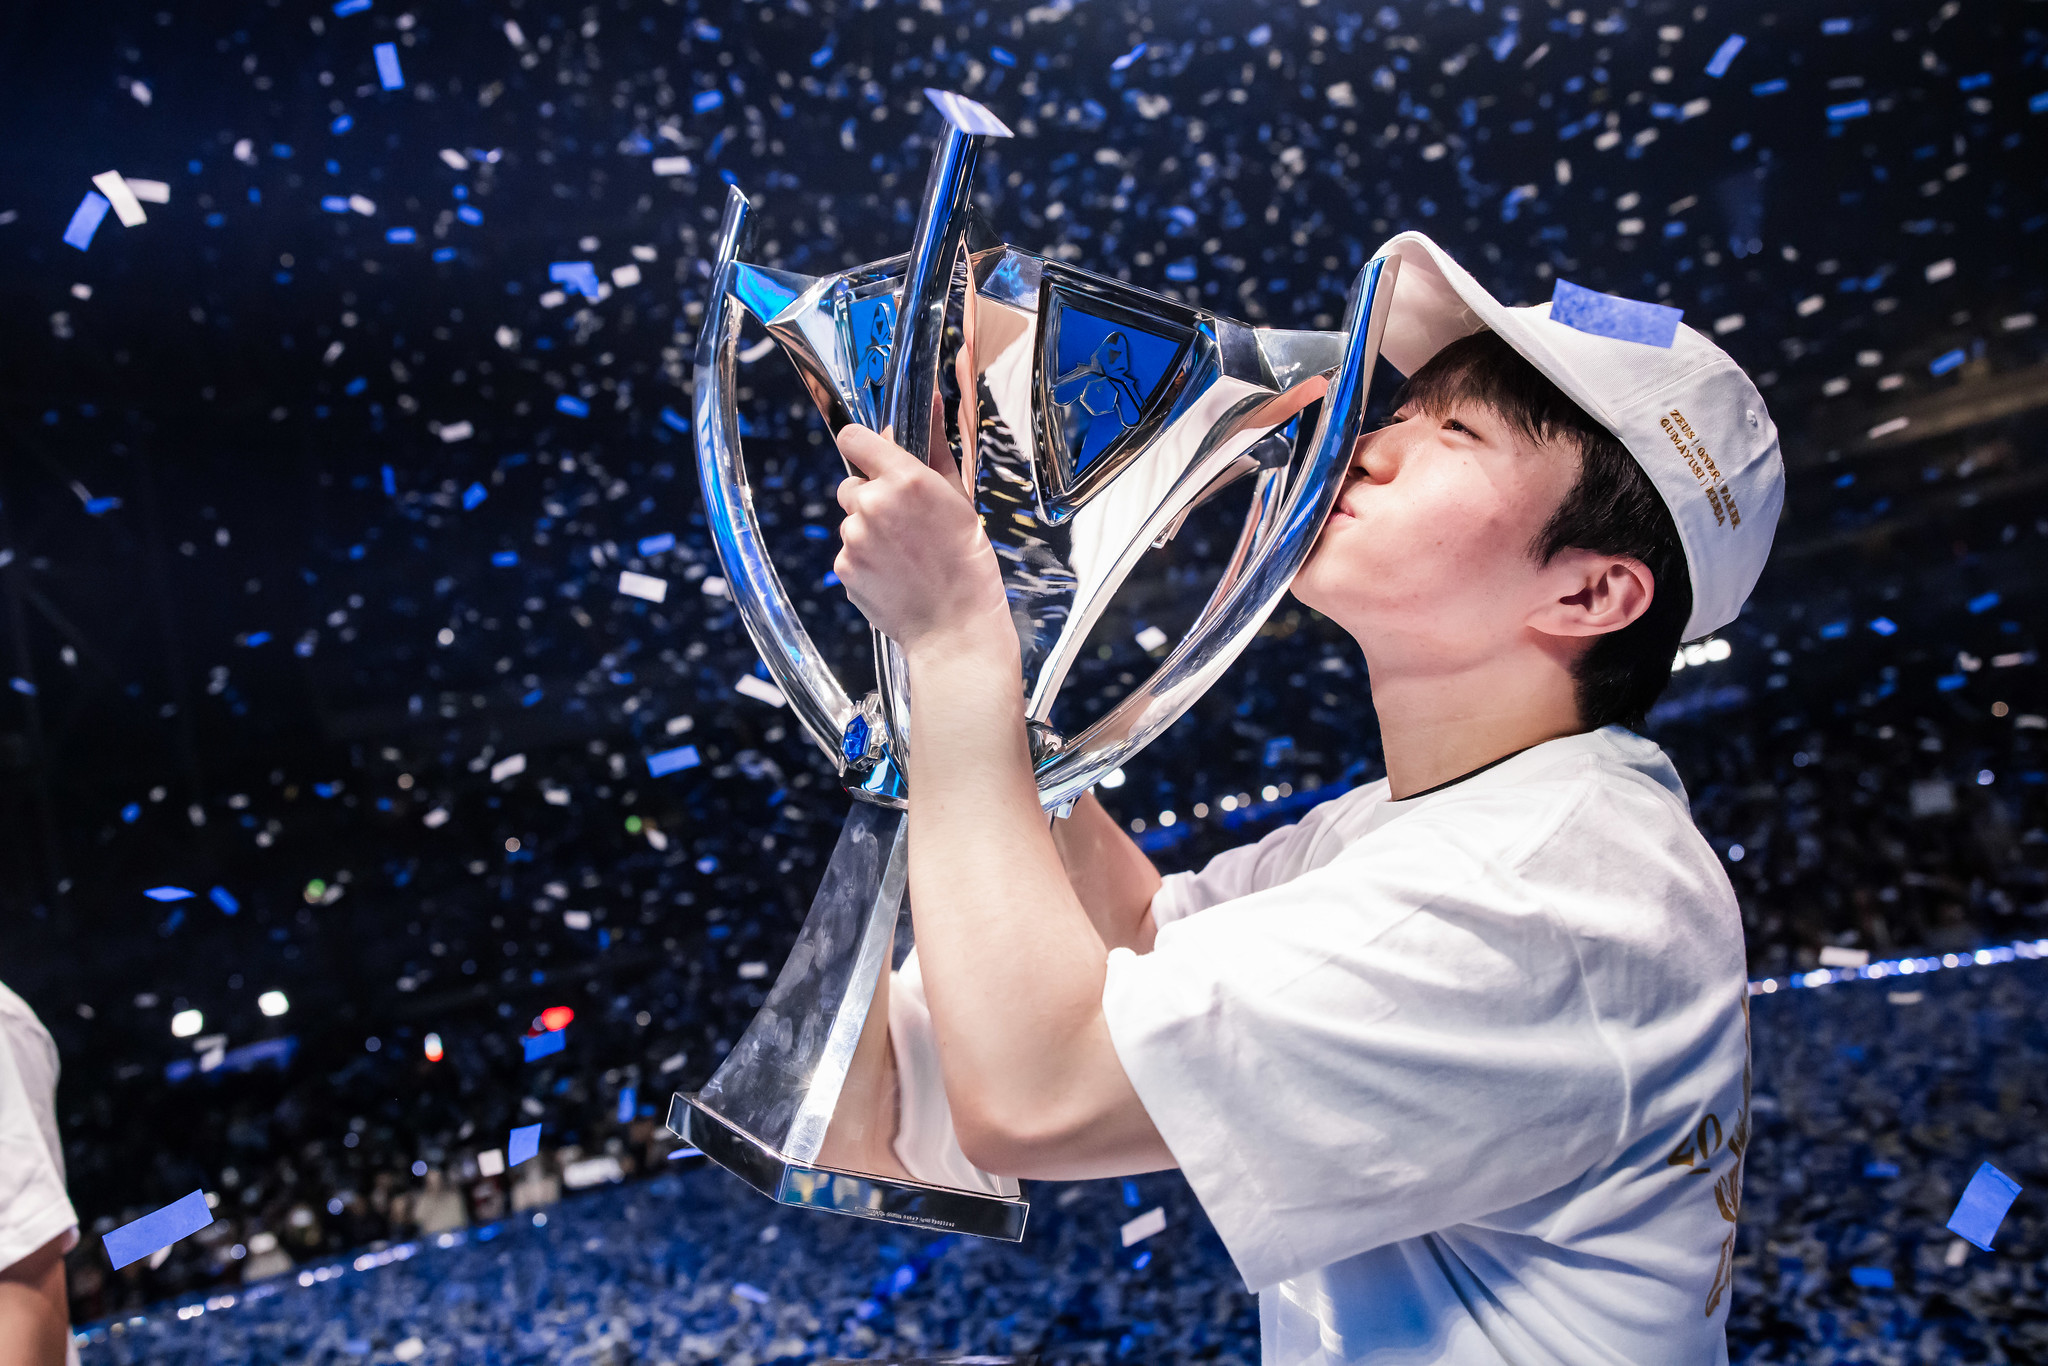 A professional League of Legends player lifts the World Championship trophy